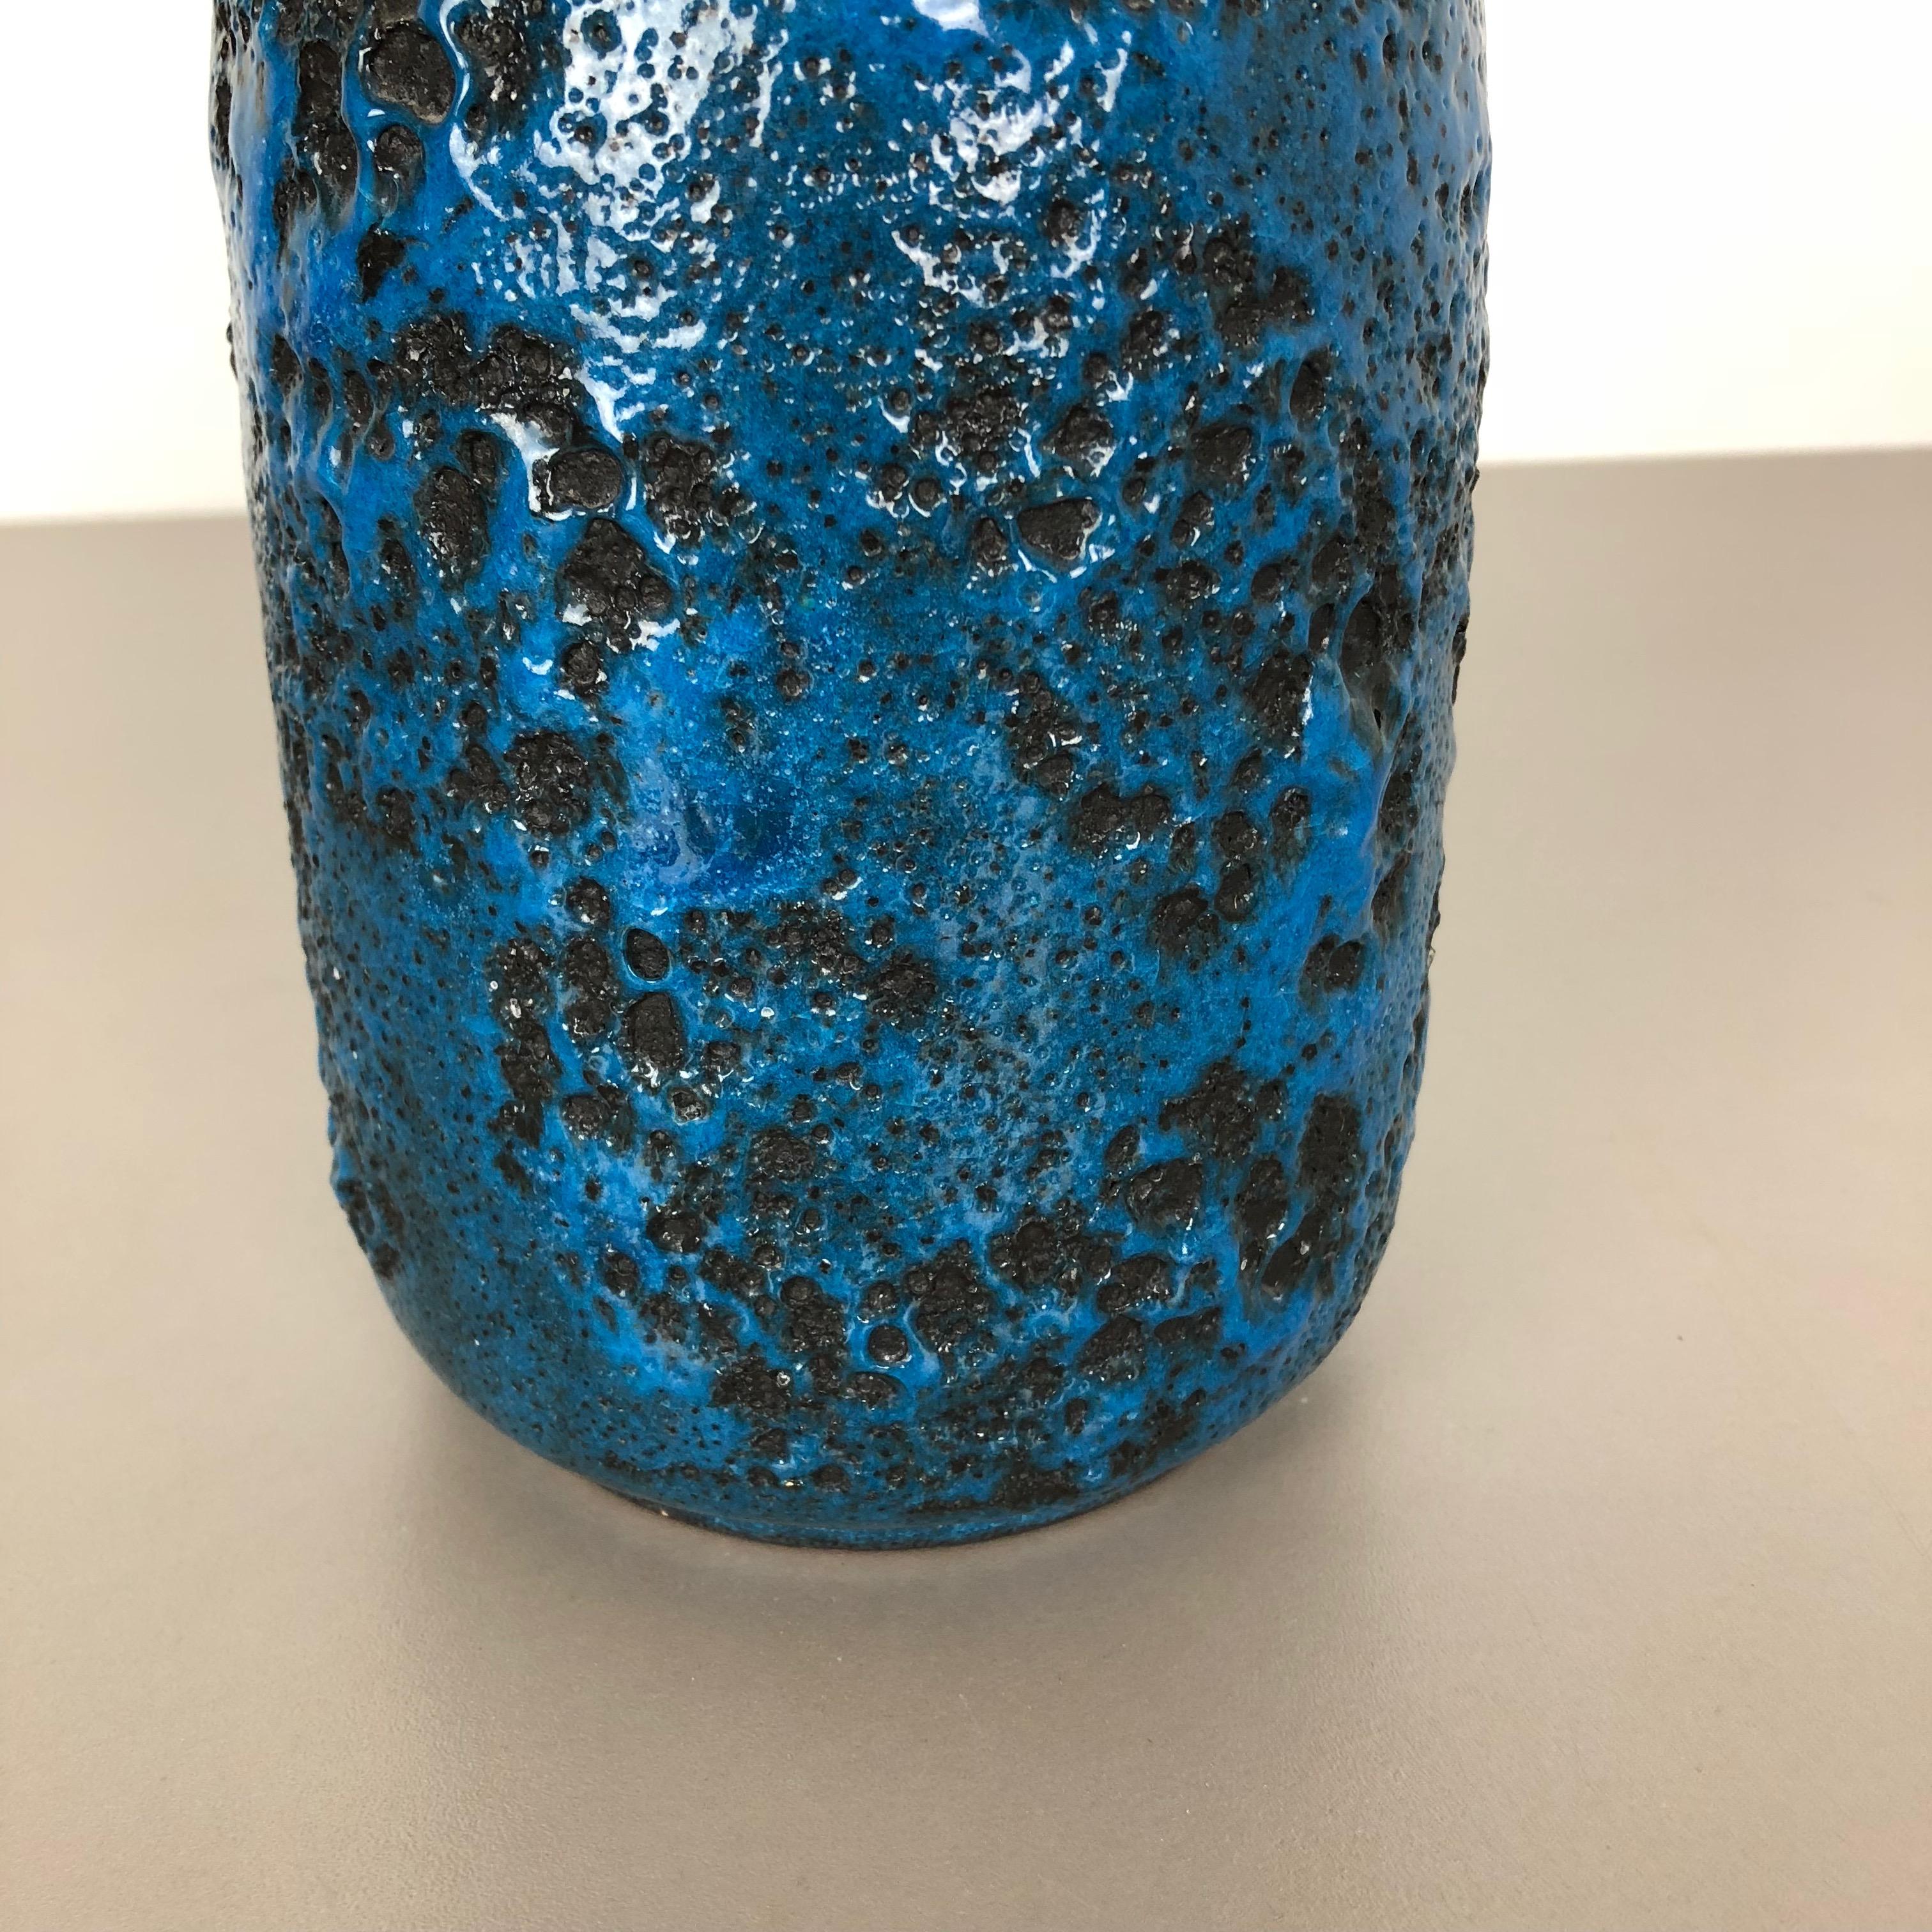 Mid-Century Modern Super Colorful Fat Lava Pottery Vase by Gräflich Ortenburg, Germany, 1950s For Sale